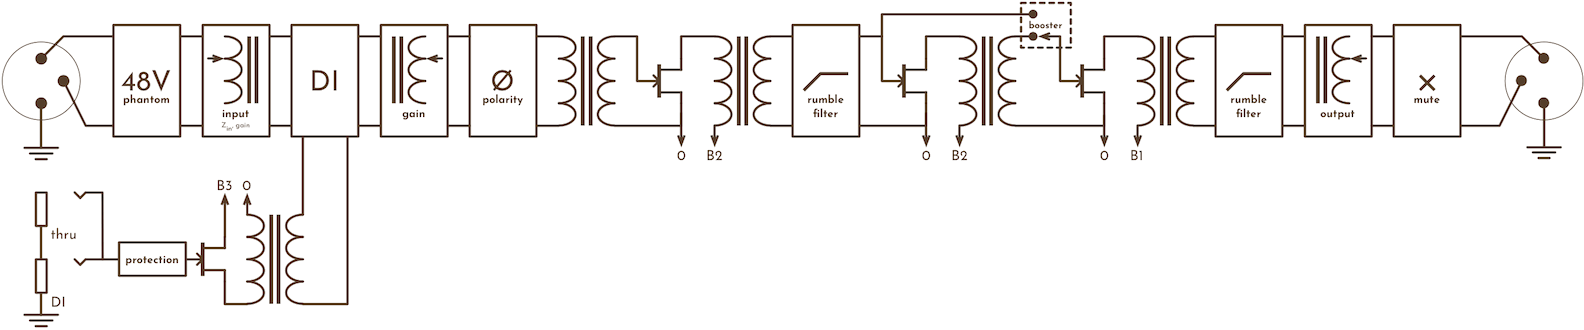 a simplified schematic